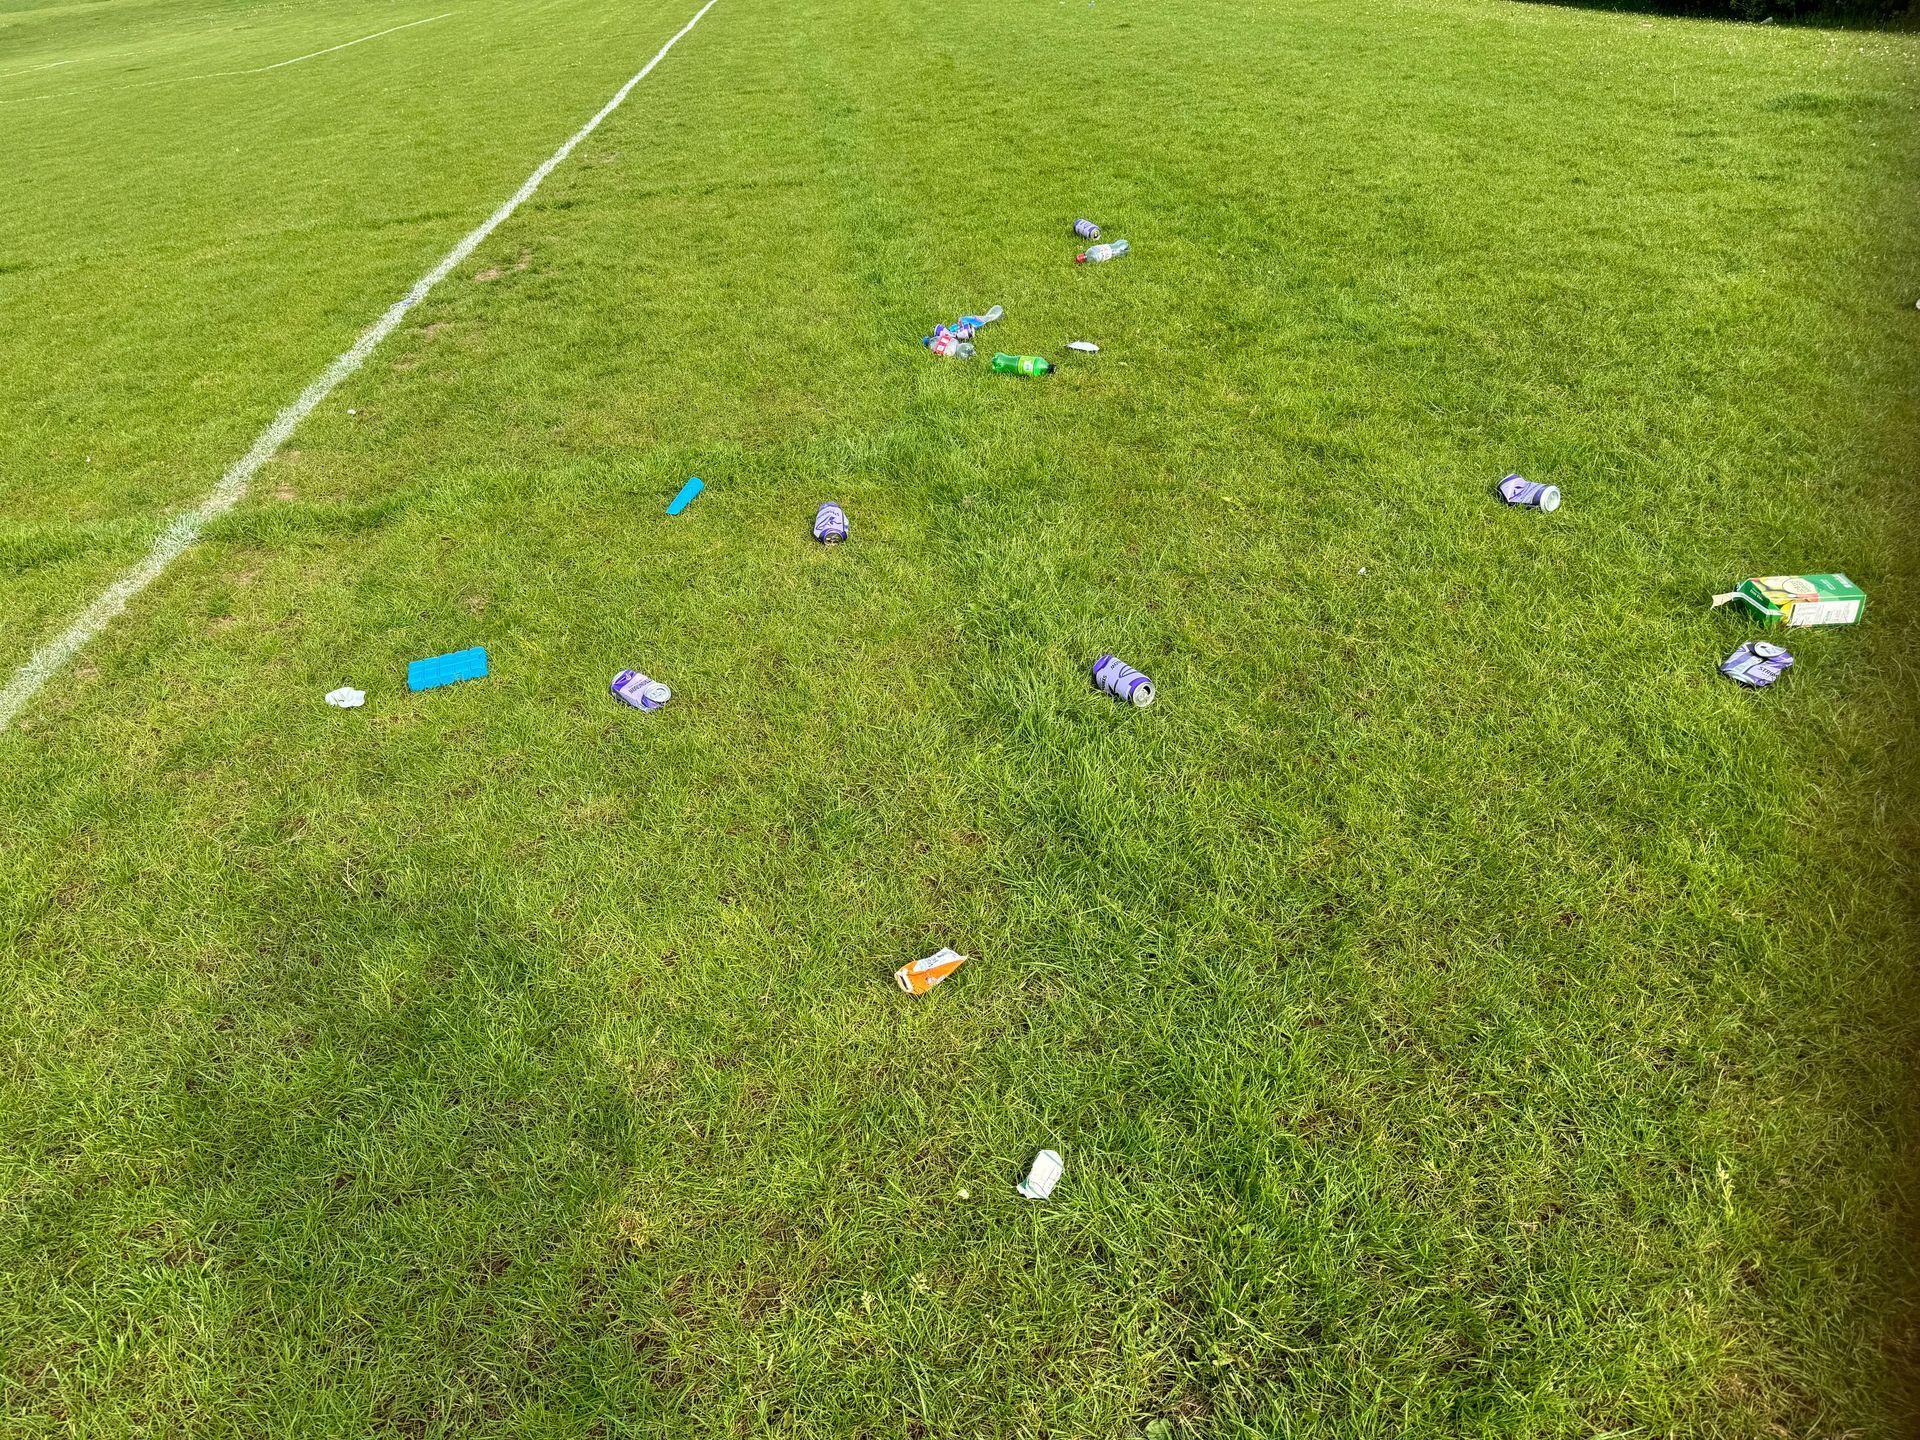 Littering on our sports pitches